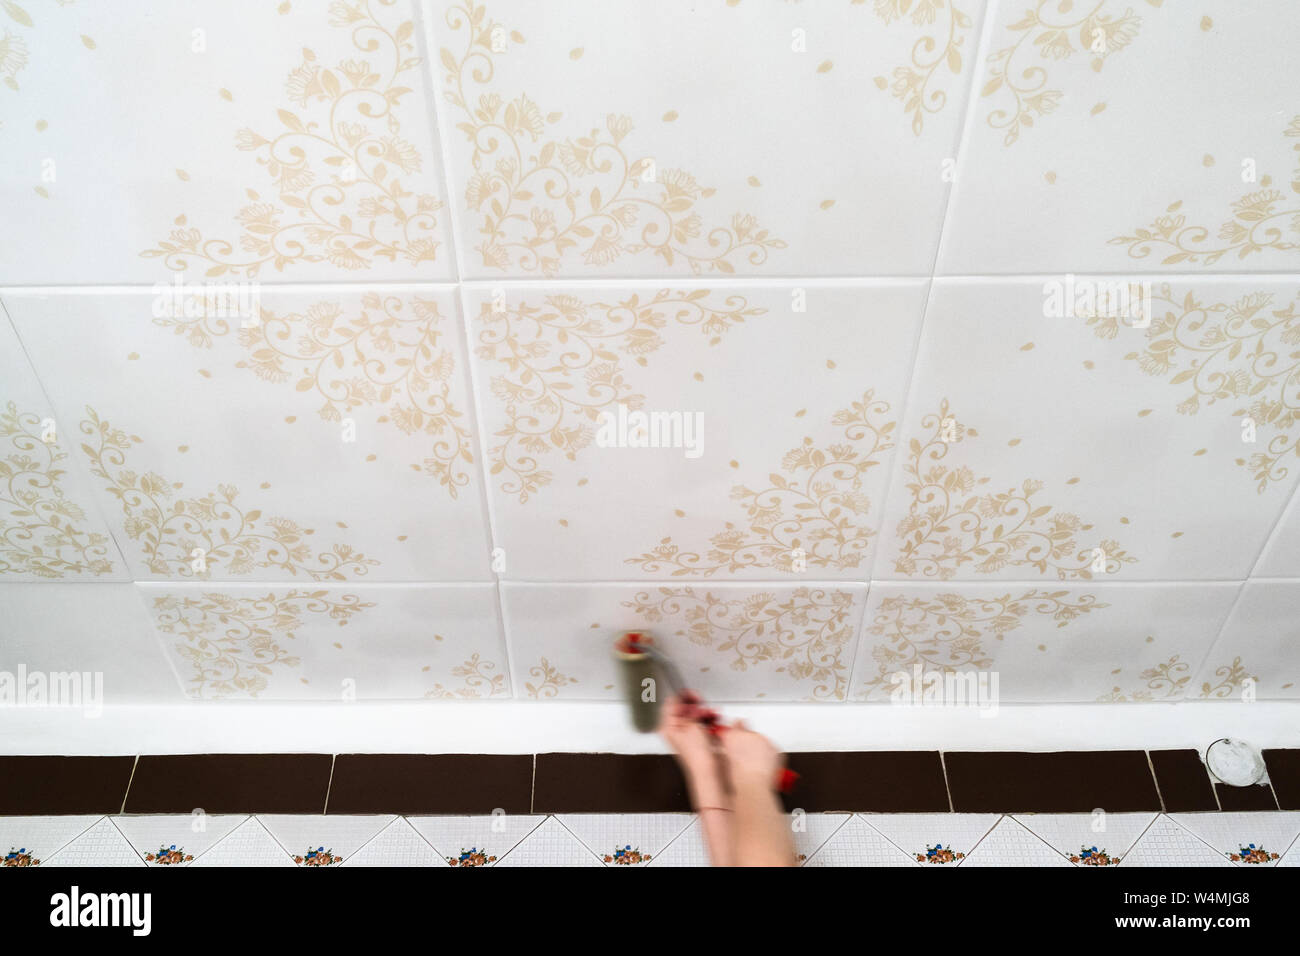 Fixing Styrofoam Ceiling Tiles With Roller At Home Kitchen